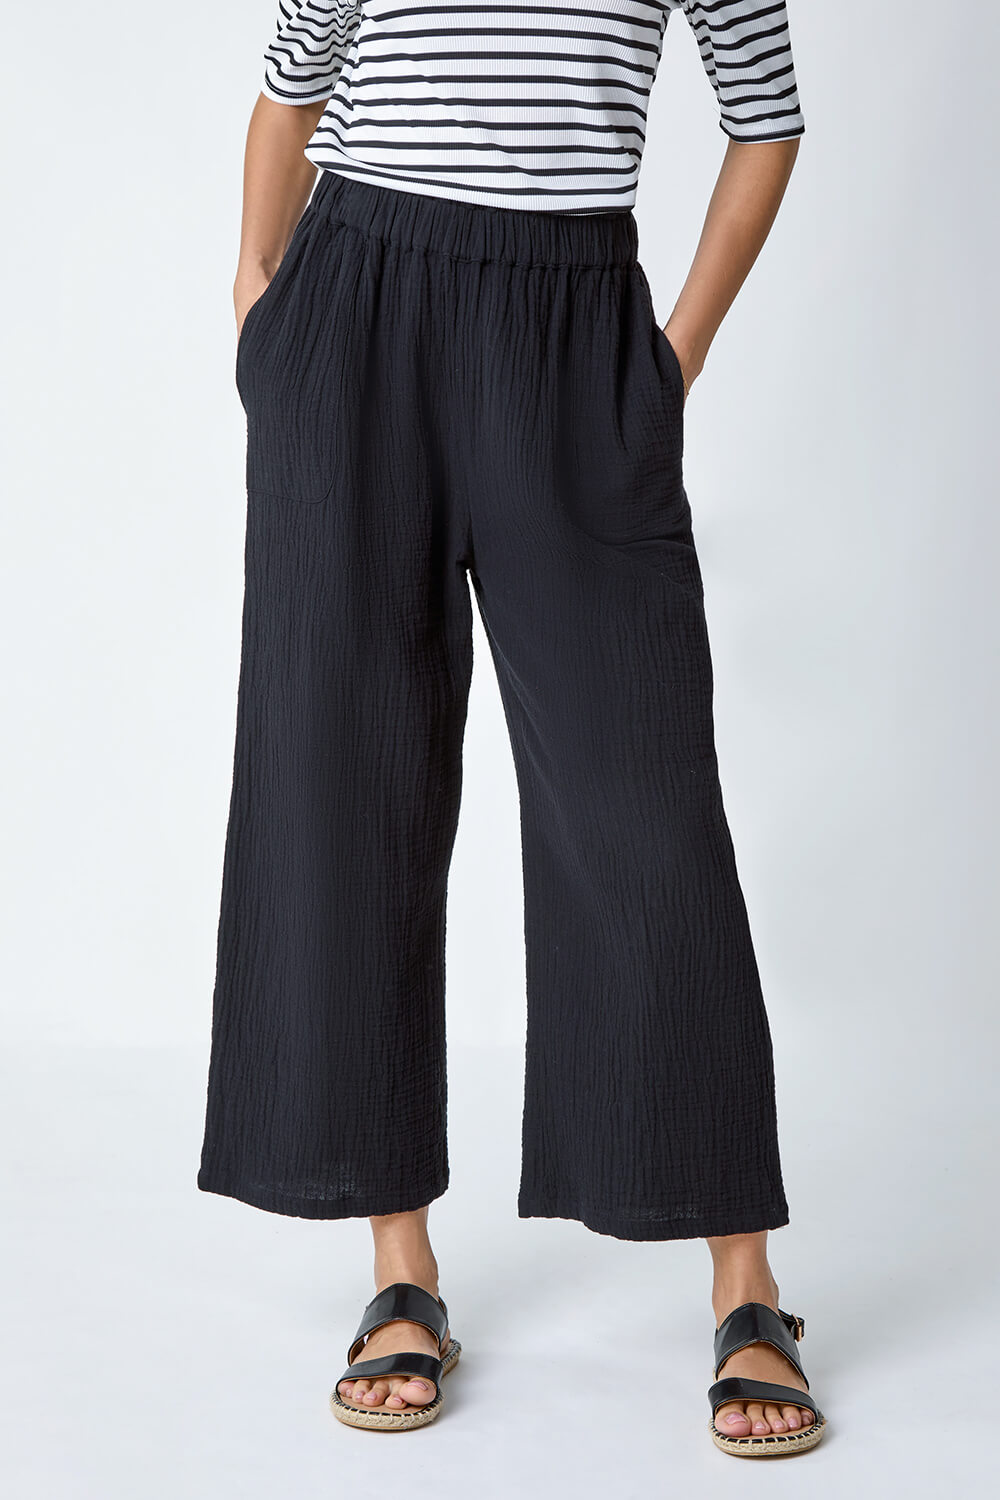 Black Textured Cotton Culotte Trousers, Image 4 of 5